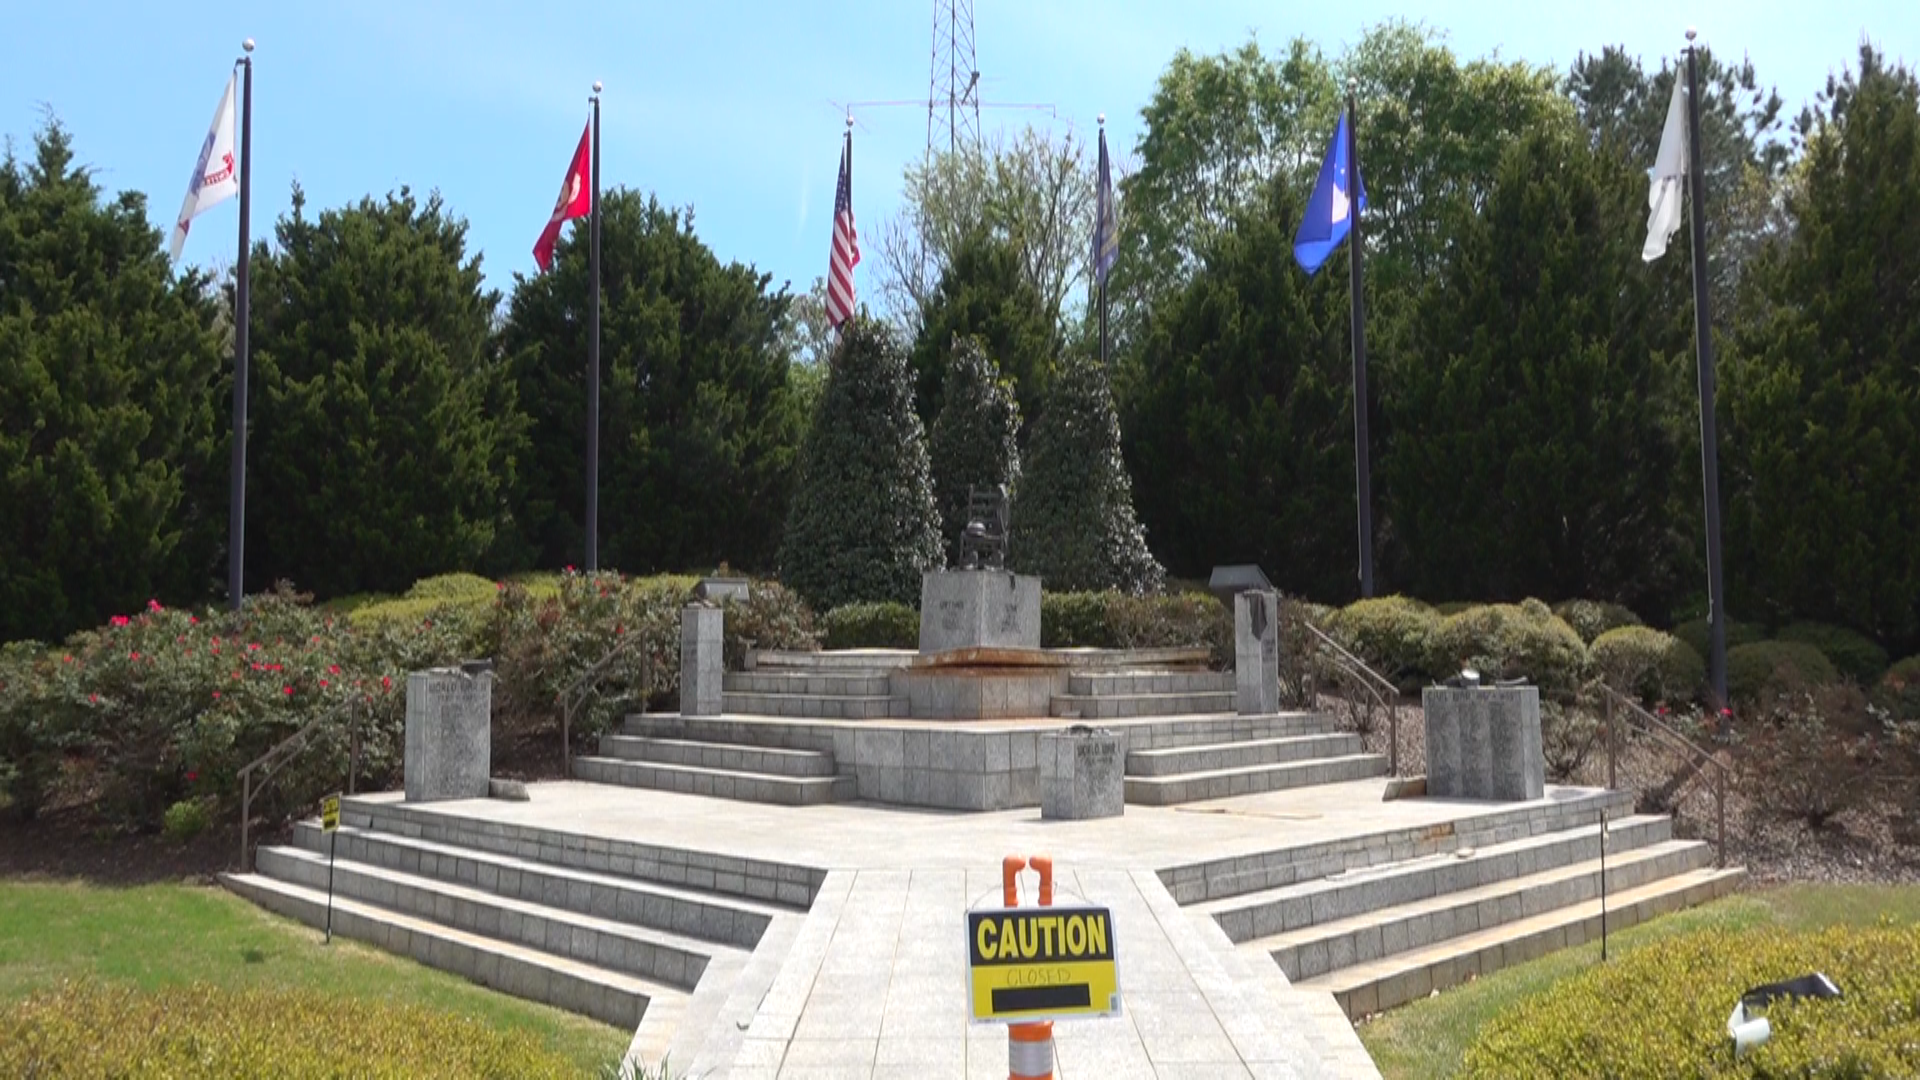 The Veteran’s War Memorial near downtown Cumming will not stand for much longer, but a new memorial celebrating public safety is being planned.